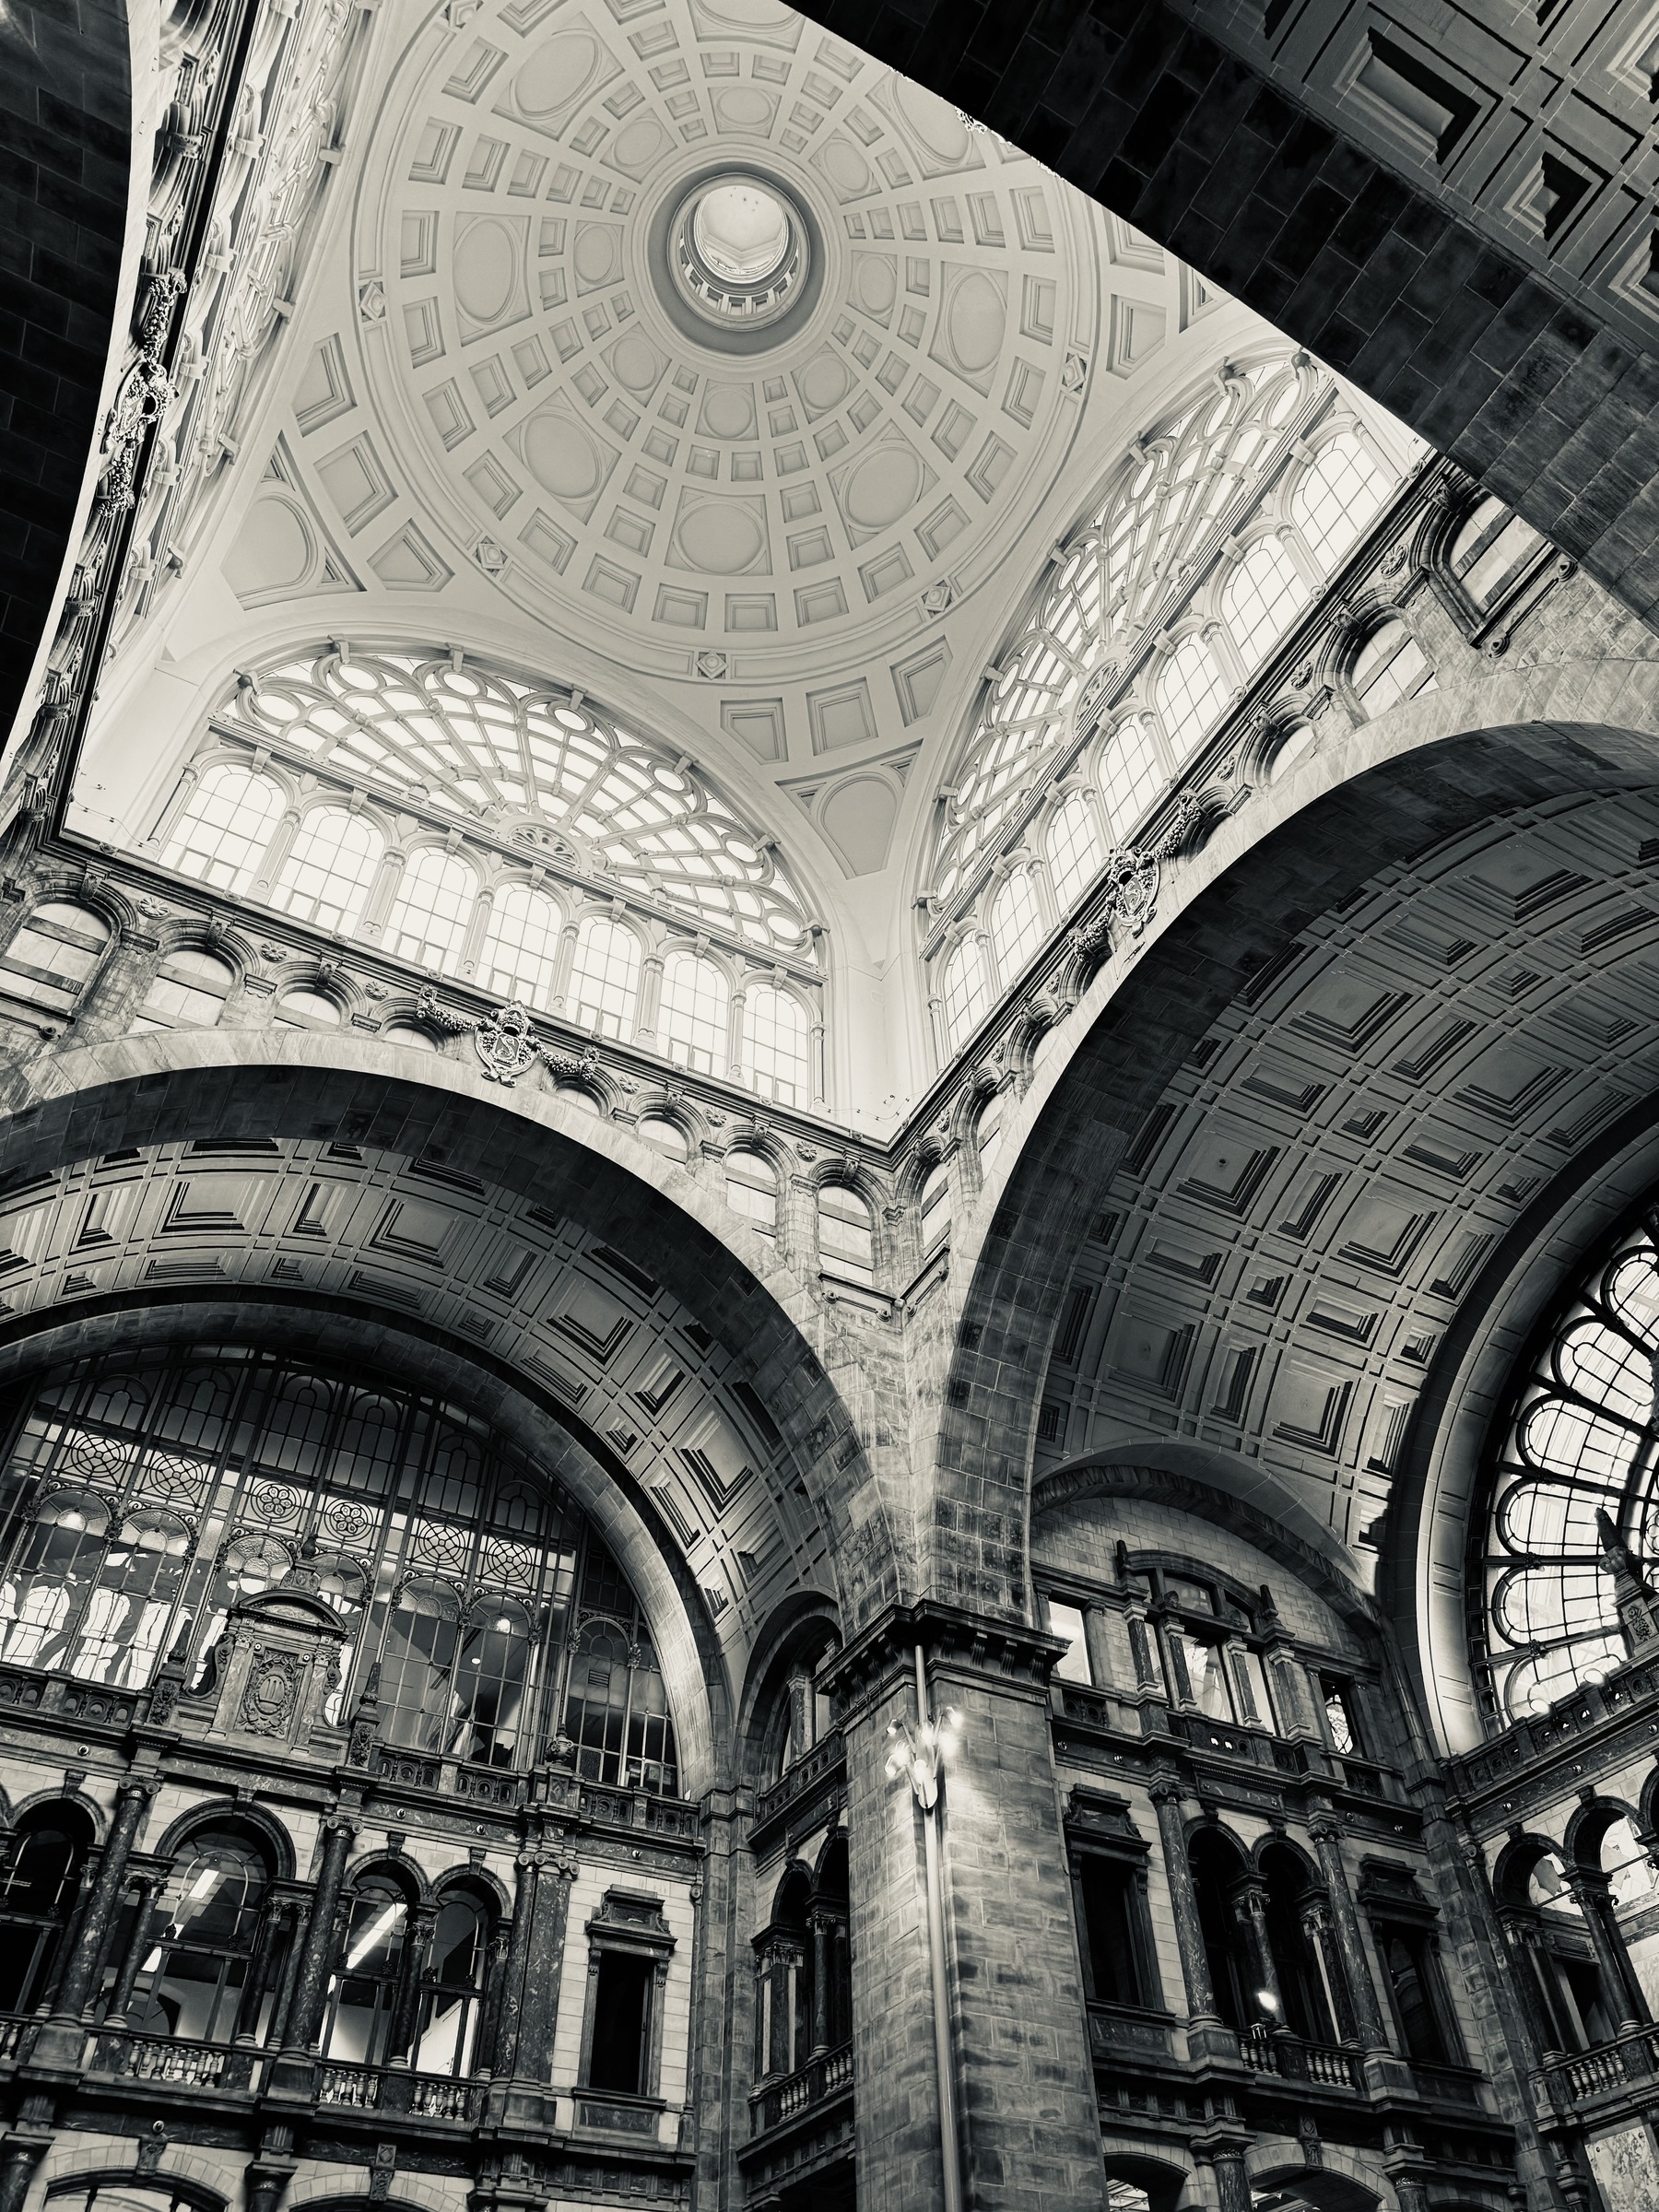 Arches holding up the main dome of Antwerp train station, in black and white.